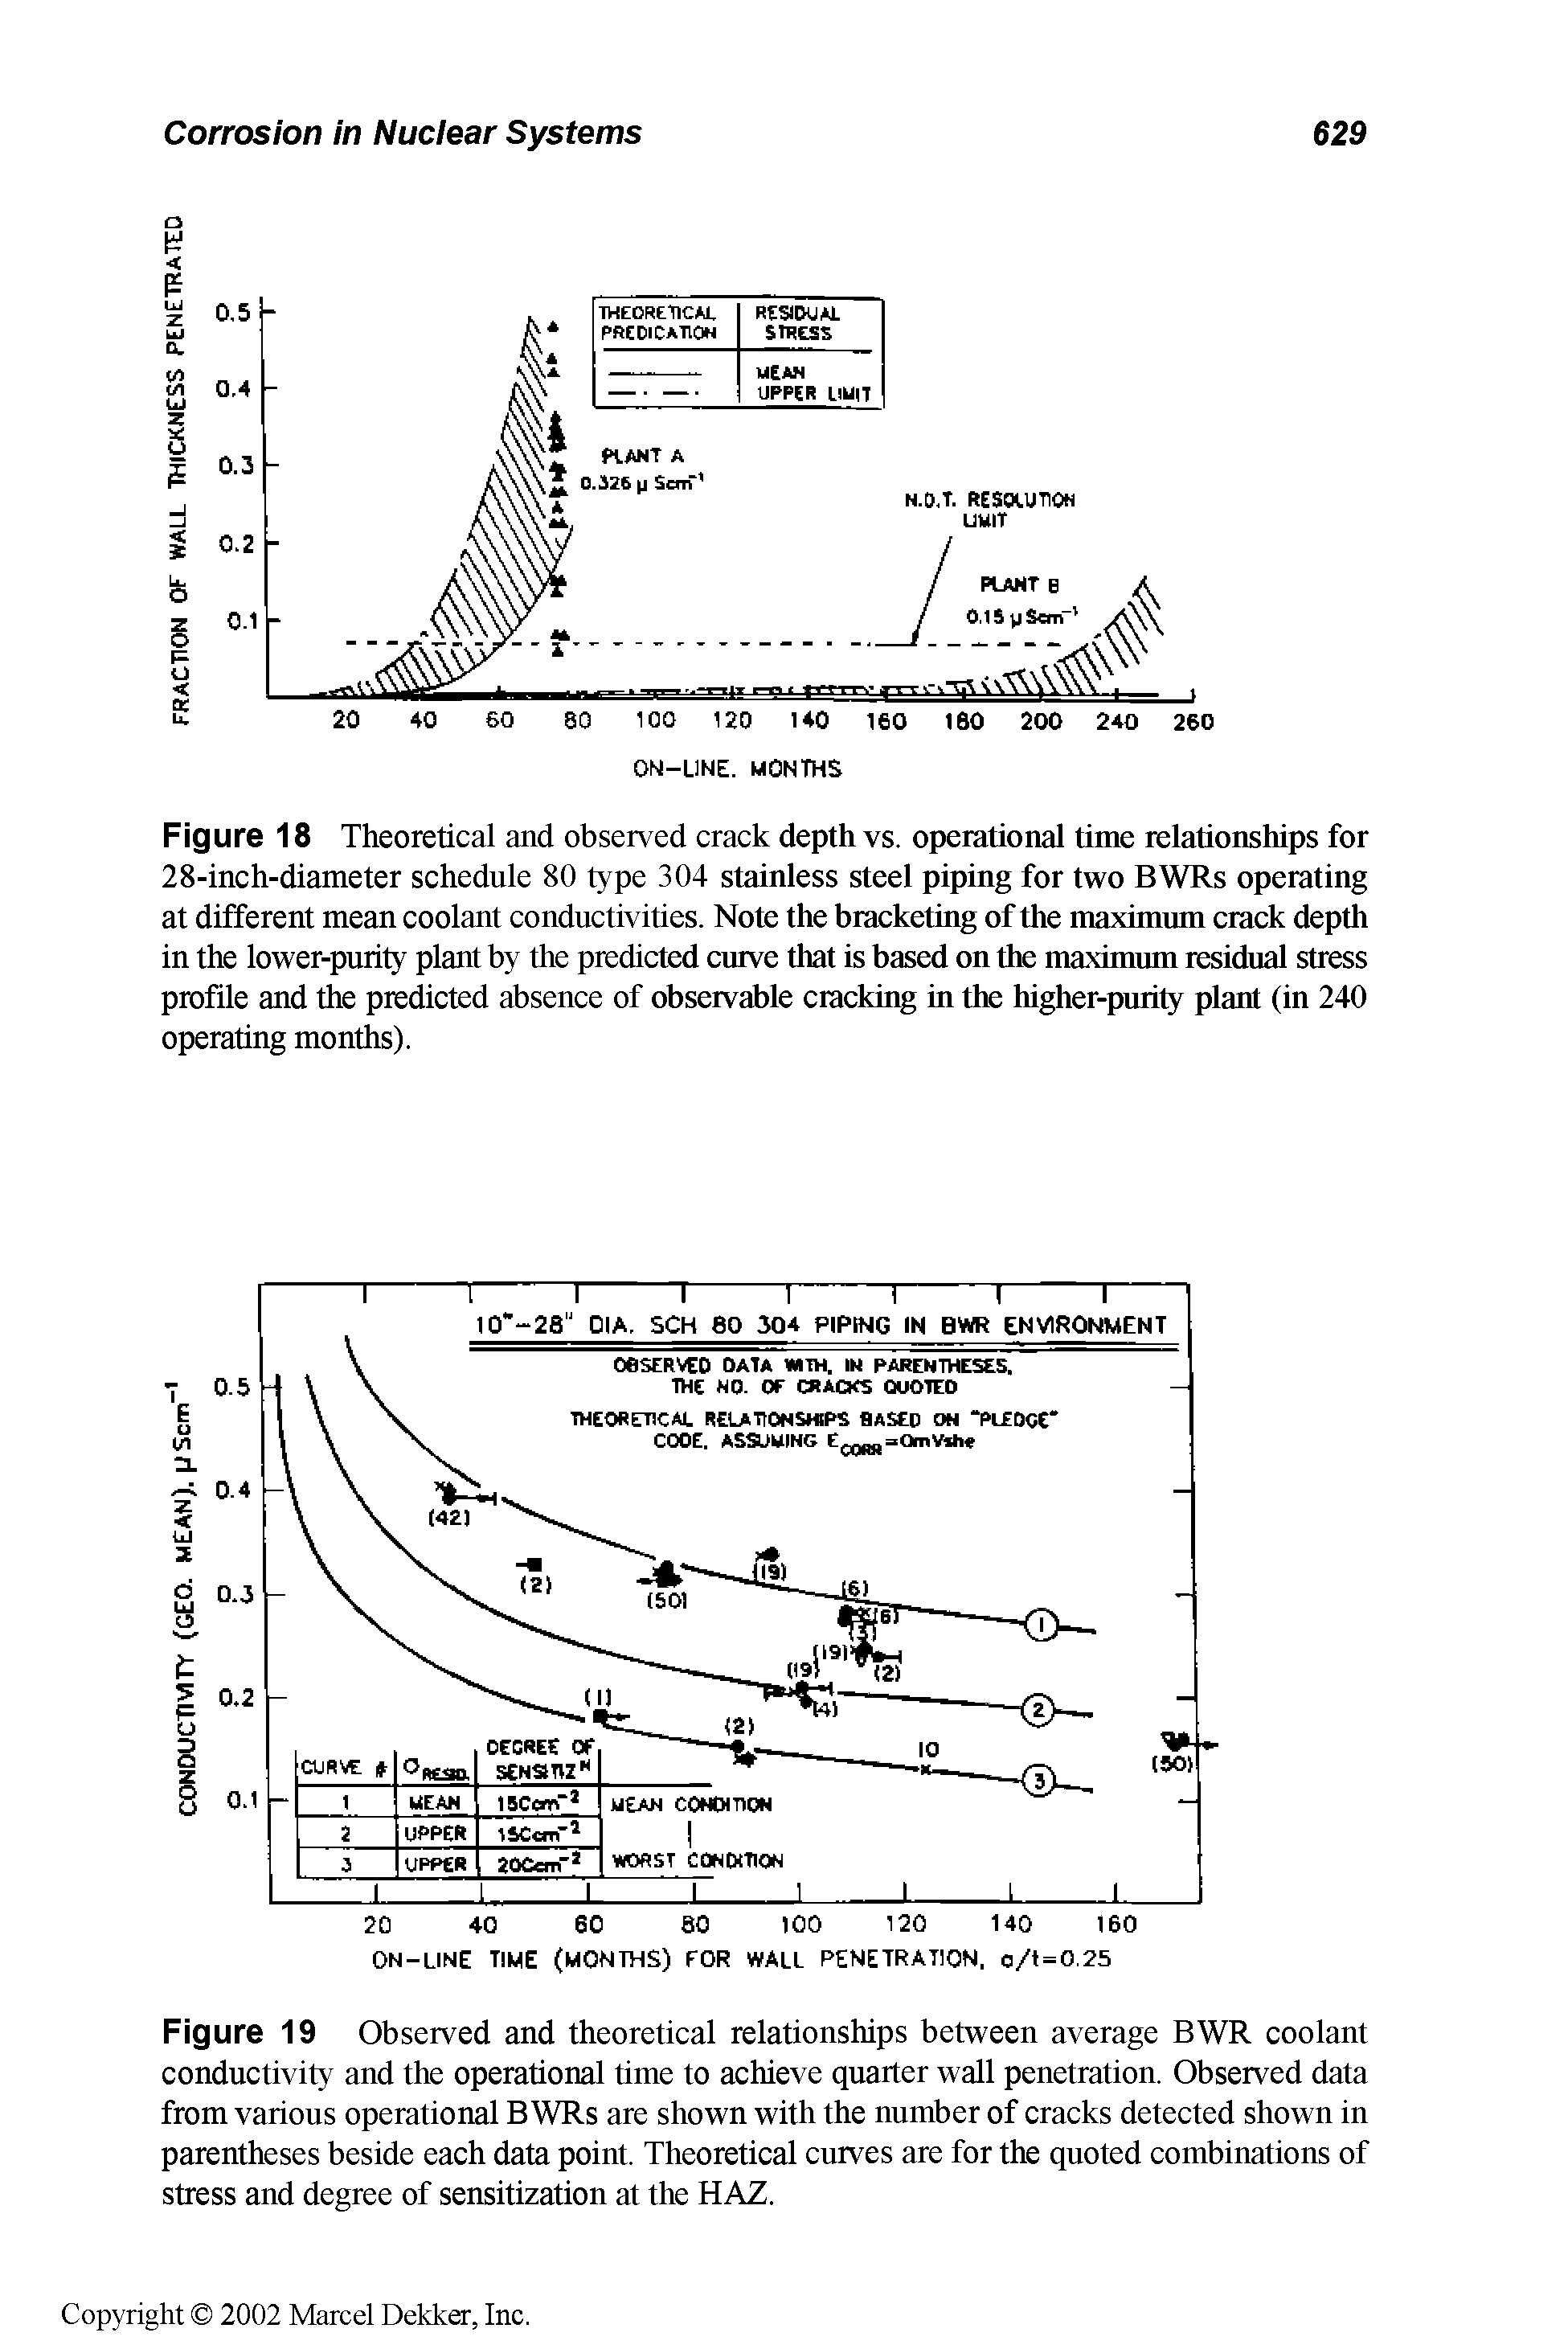 Figure 18 Theoretical and observed crack depth vs. operational time relationships for 28-inch-diameter schedule 80 type 304 stainless steel piping for two BWRs operating at different mean coolant conductivities. Note the bracketing of the maximum crack depth in the lower-puiity plant by the predicted curve that is based on the maximum residual stress profile and the predicted absence of observable cracking in the higher-purity plant (in 240 operating months).